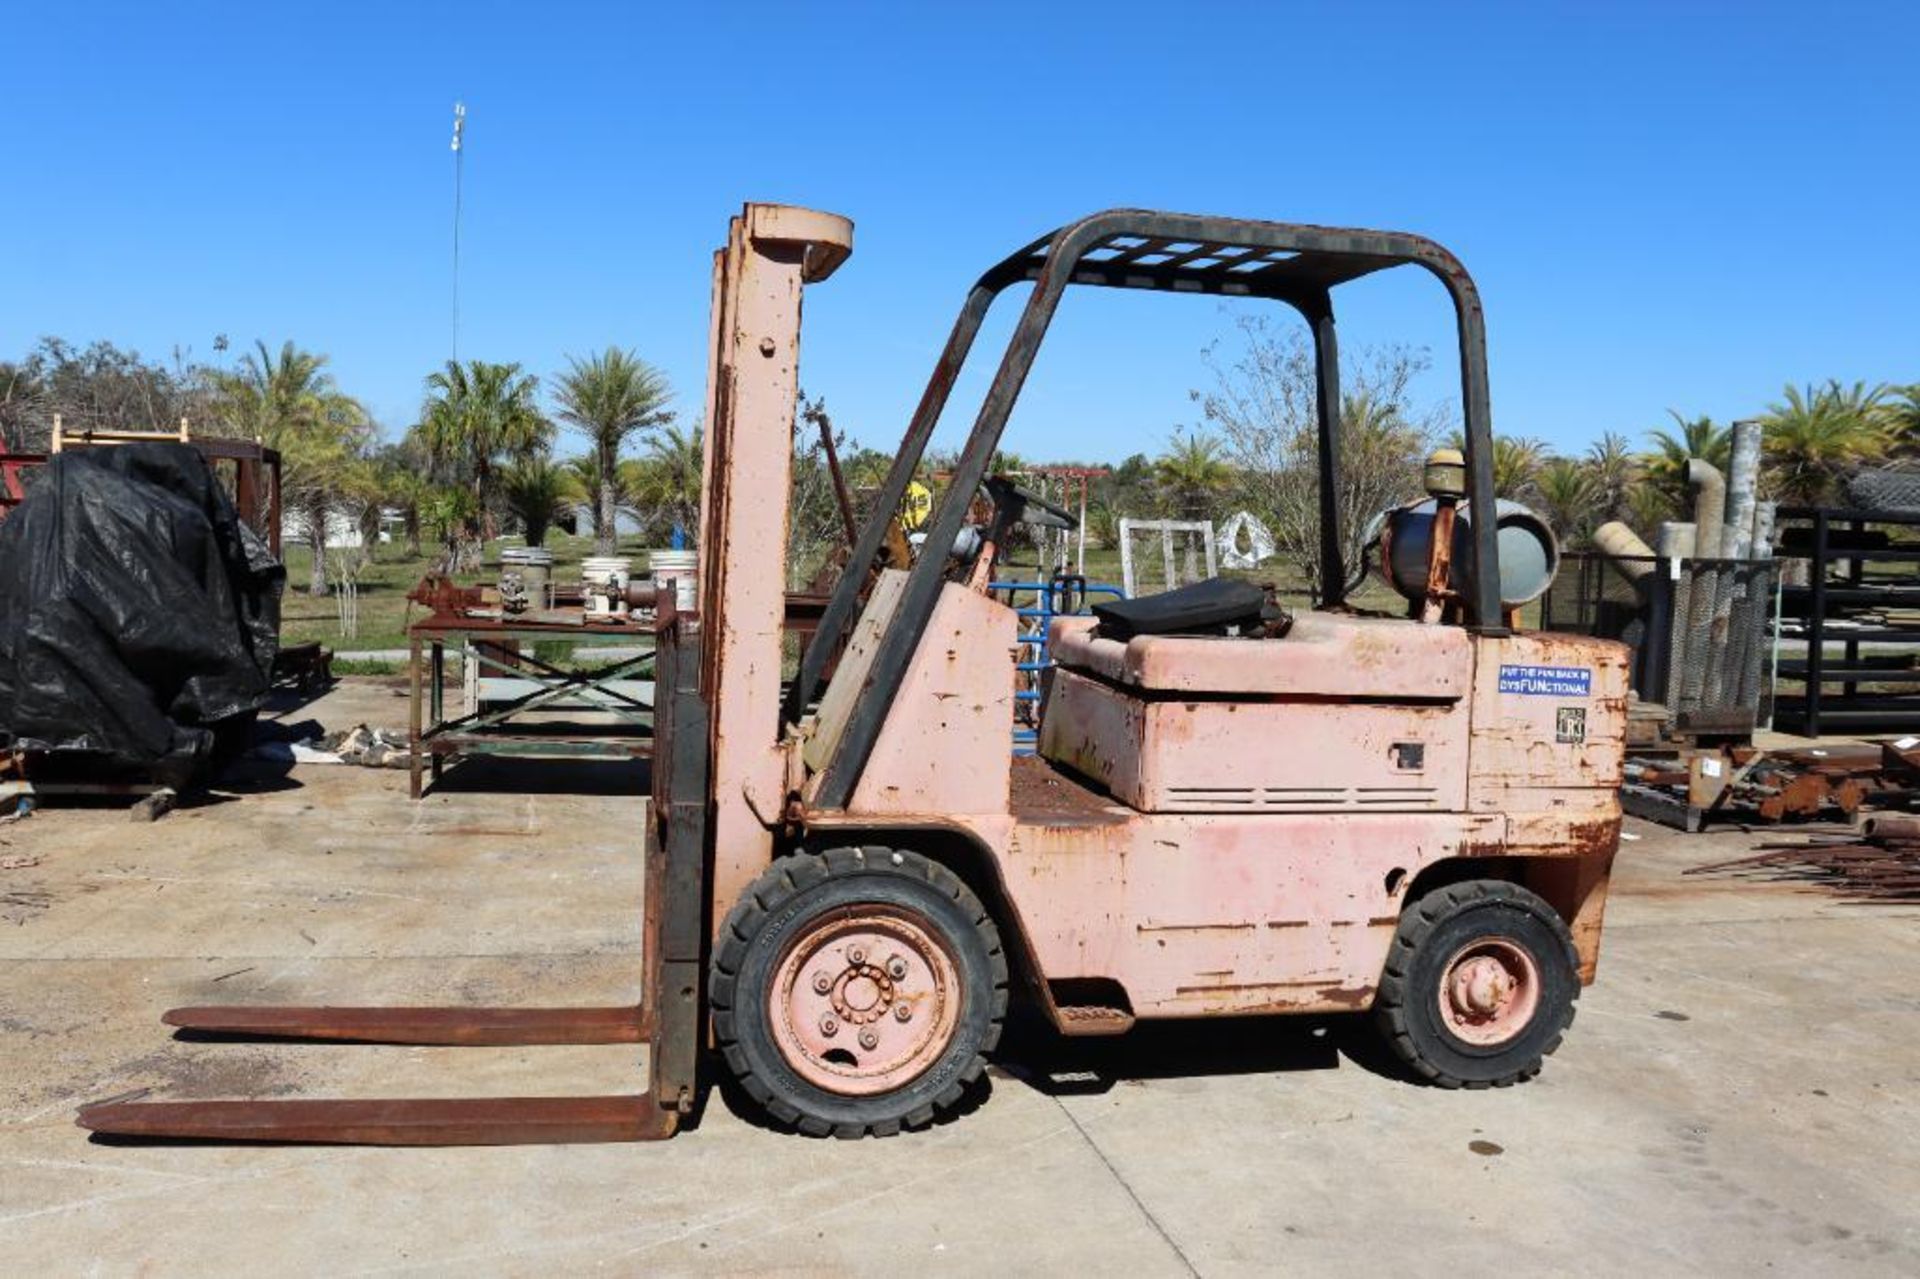 Towmotor VC60C pneumatic tire forklift